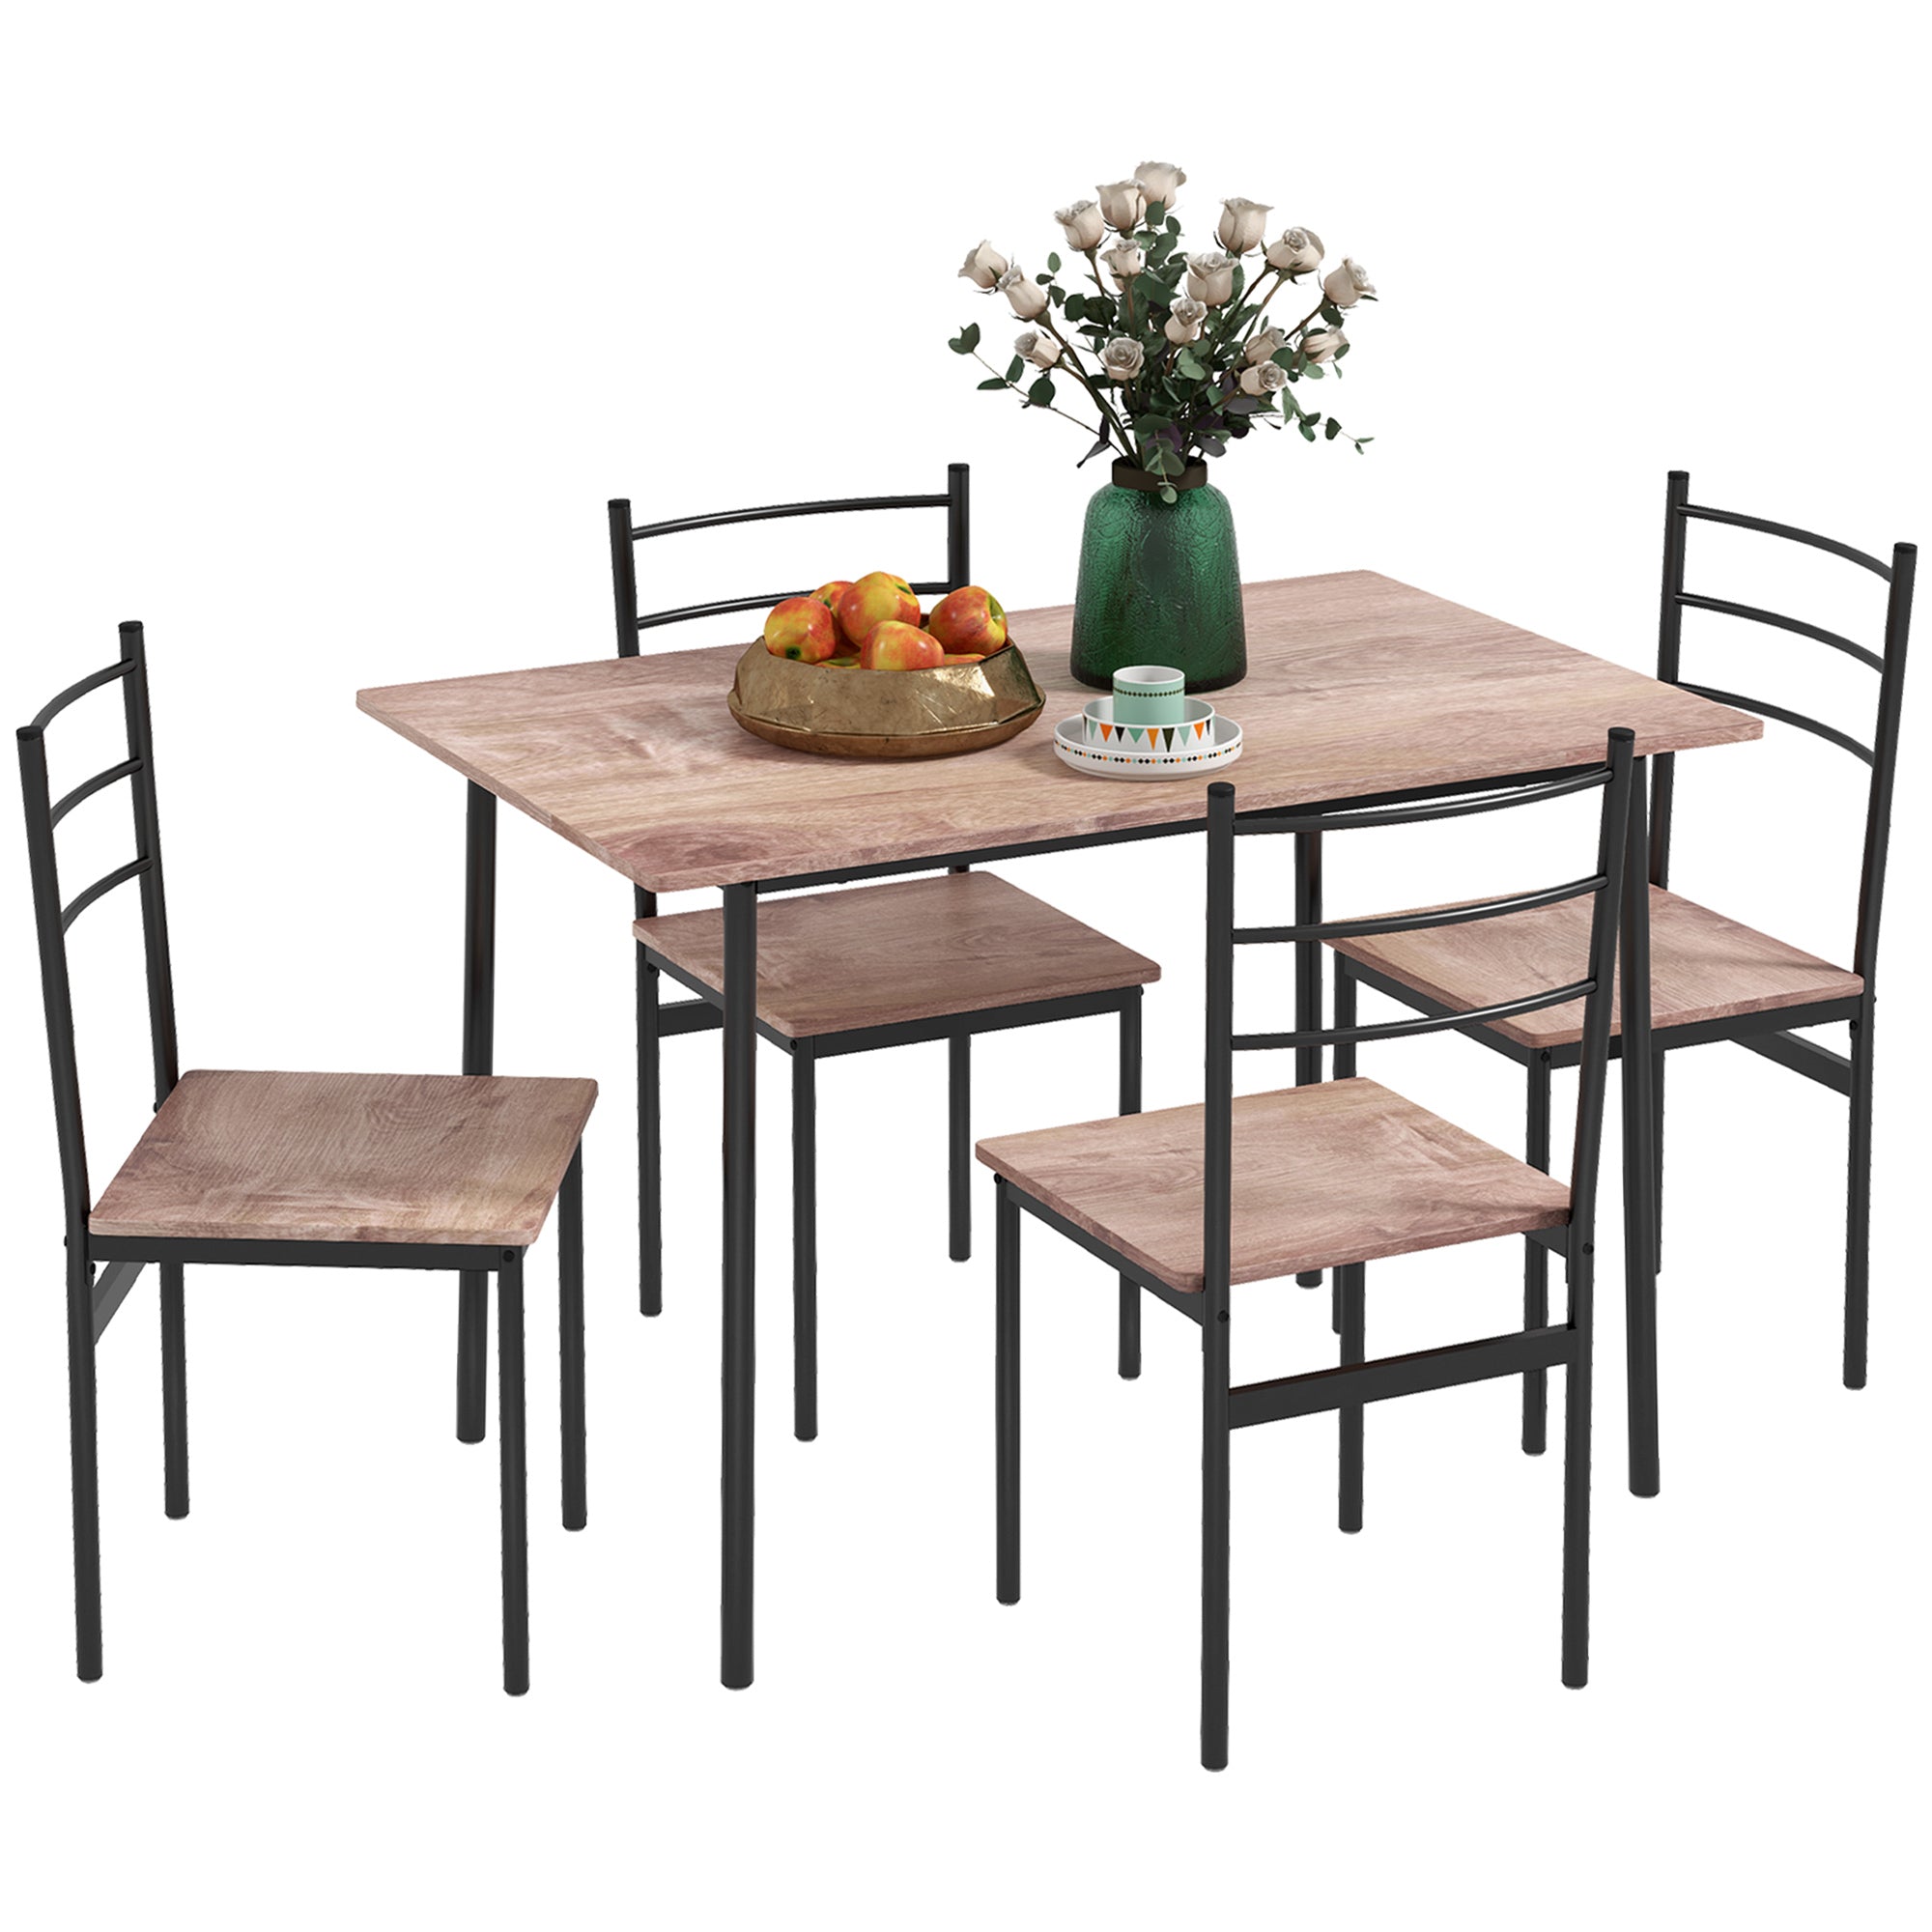 HOMCOM 5 Piece Dining Room Table Set for 4, Space brown-mdf